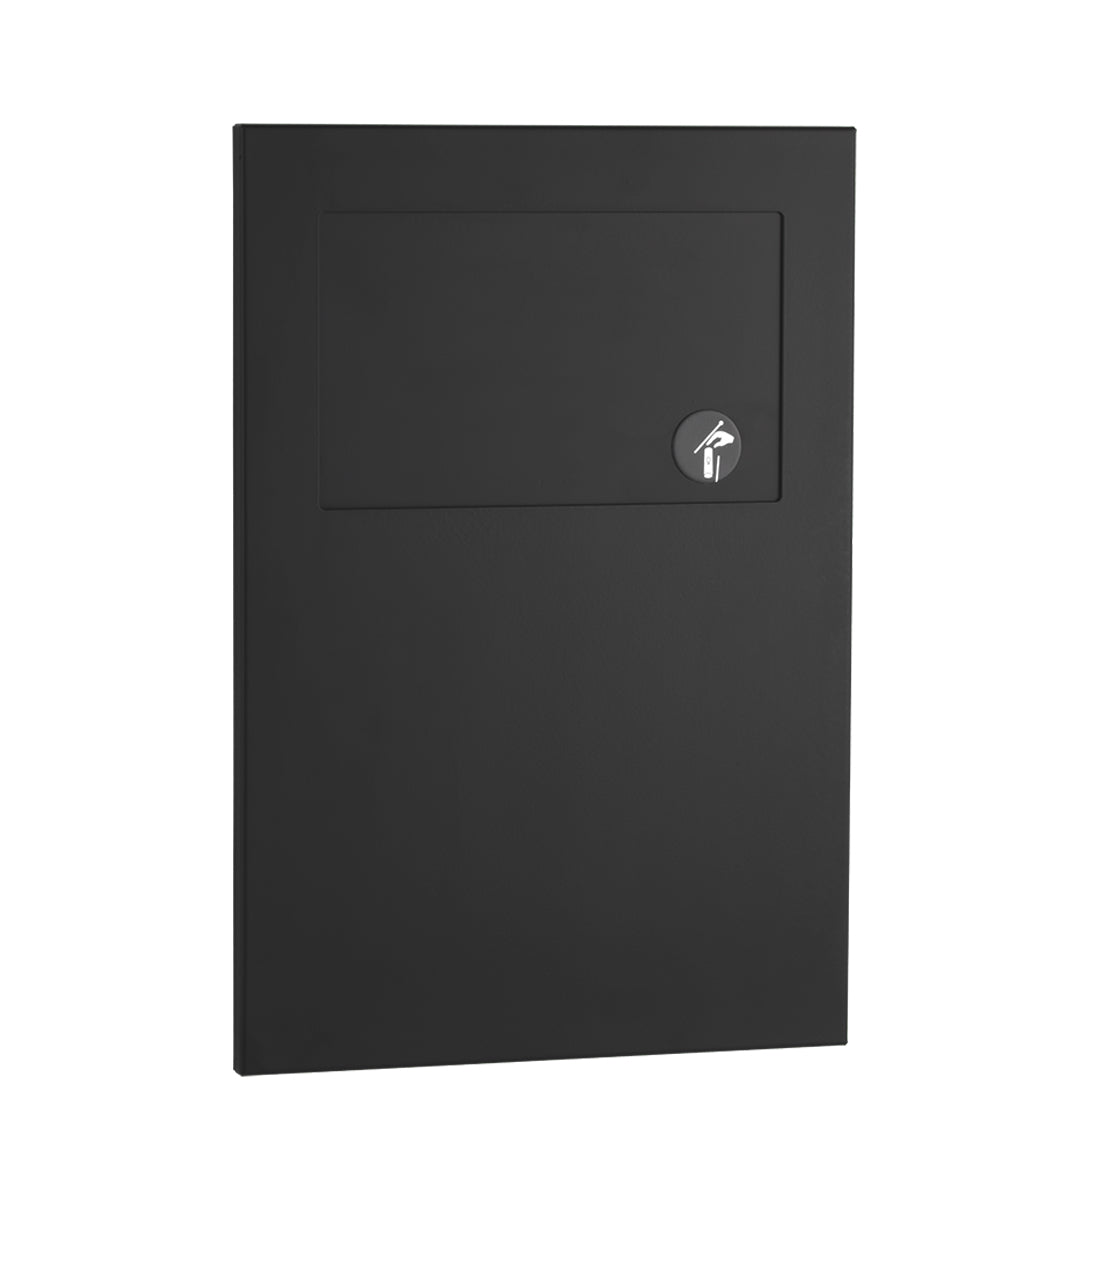 The Bobrick B-35303 is a recessed 1/2 gallon sanitary napkin disposal unit in stainless steel with a matte black finish.